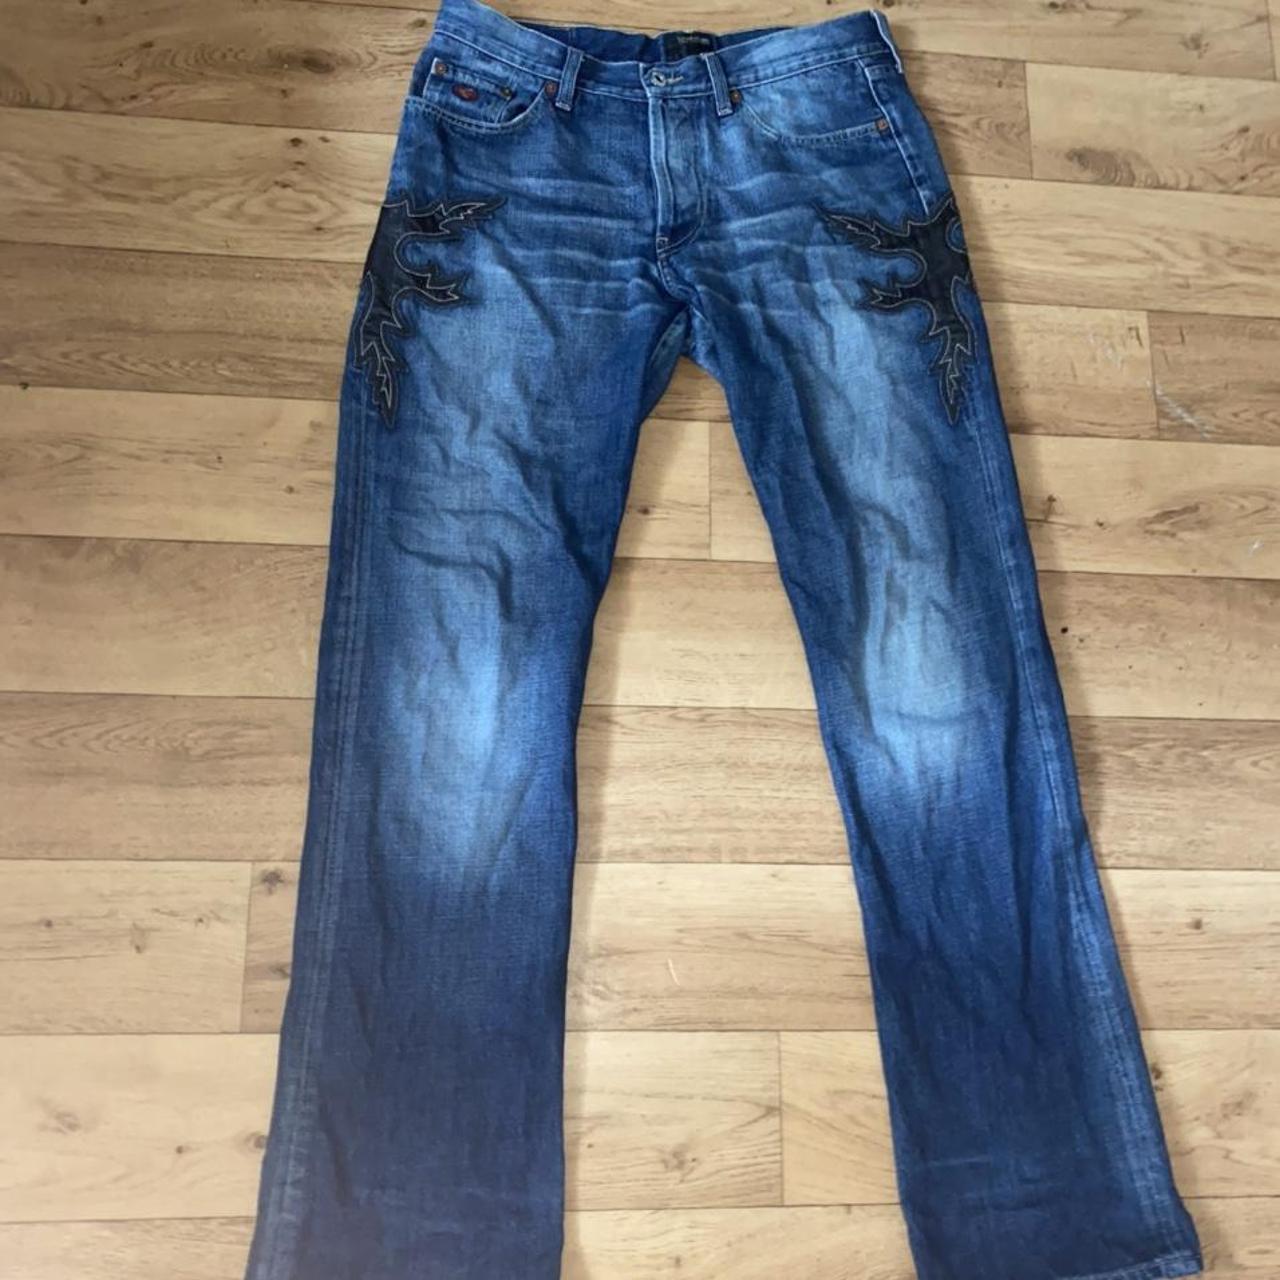 00s jean with a leather pattern - Depop